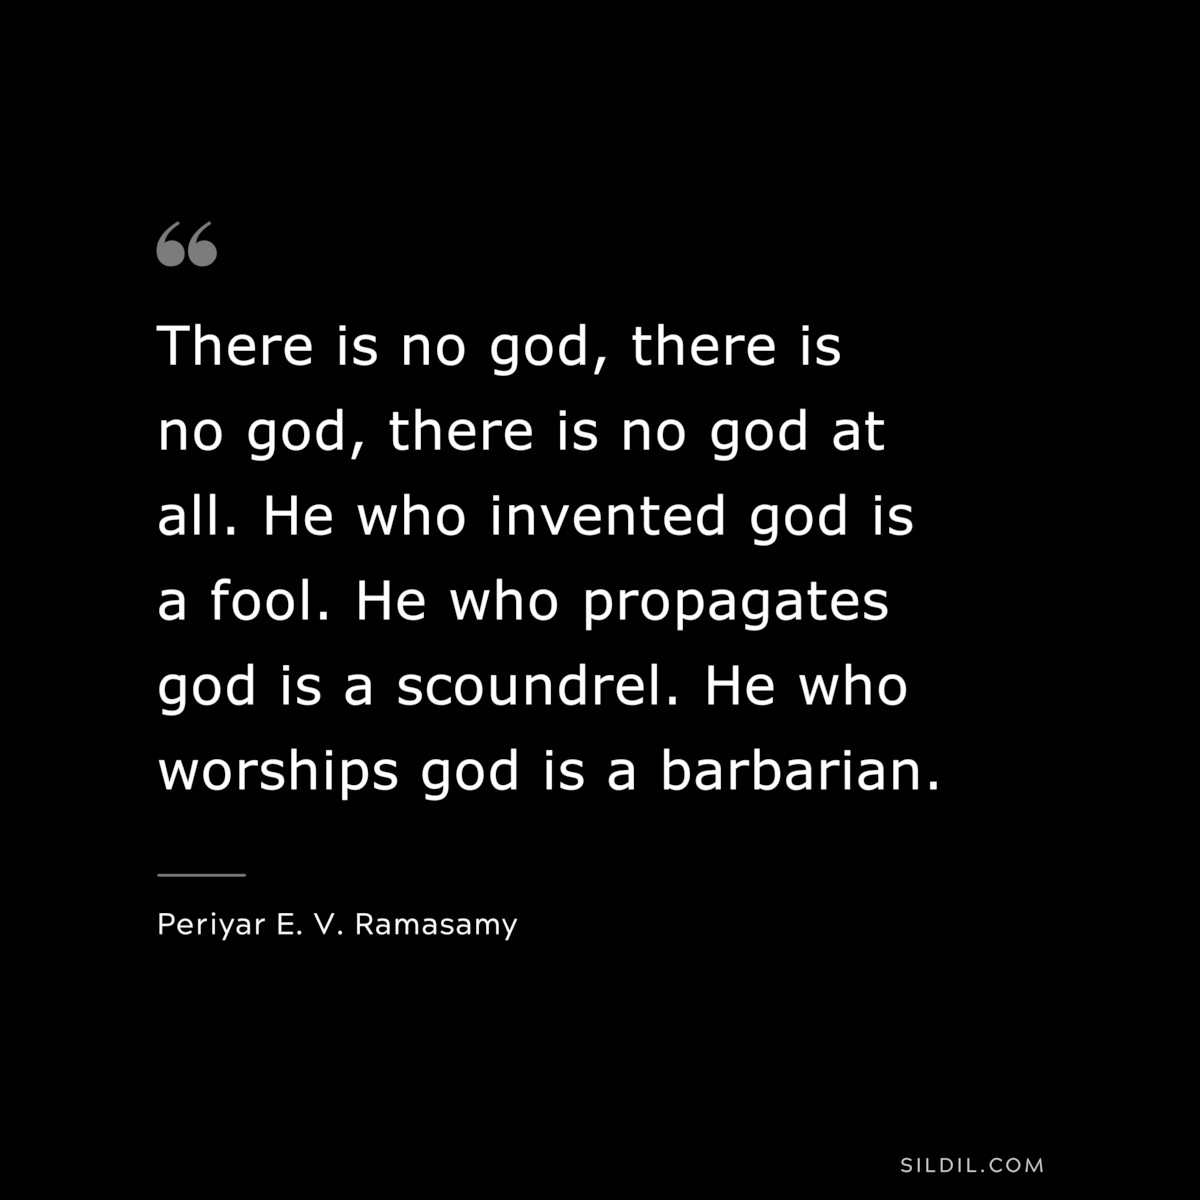 There is no god, there is no god, there is no god at all. He who invented god is a fool. He who propagates god is a scoundrel. He who worships god is a barbarian. ― Periyar E. V. Ramasamy